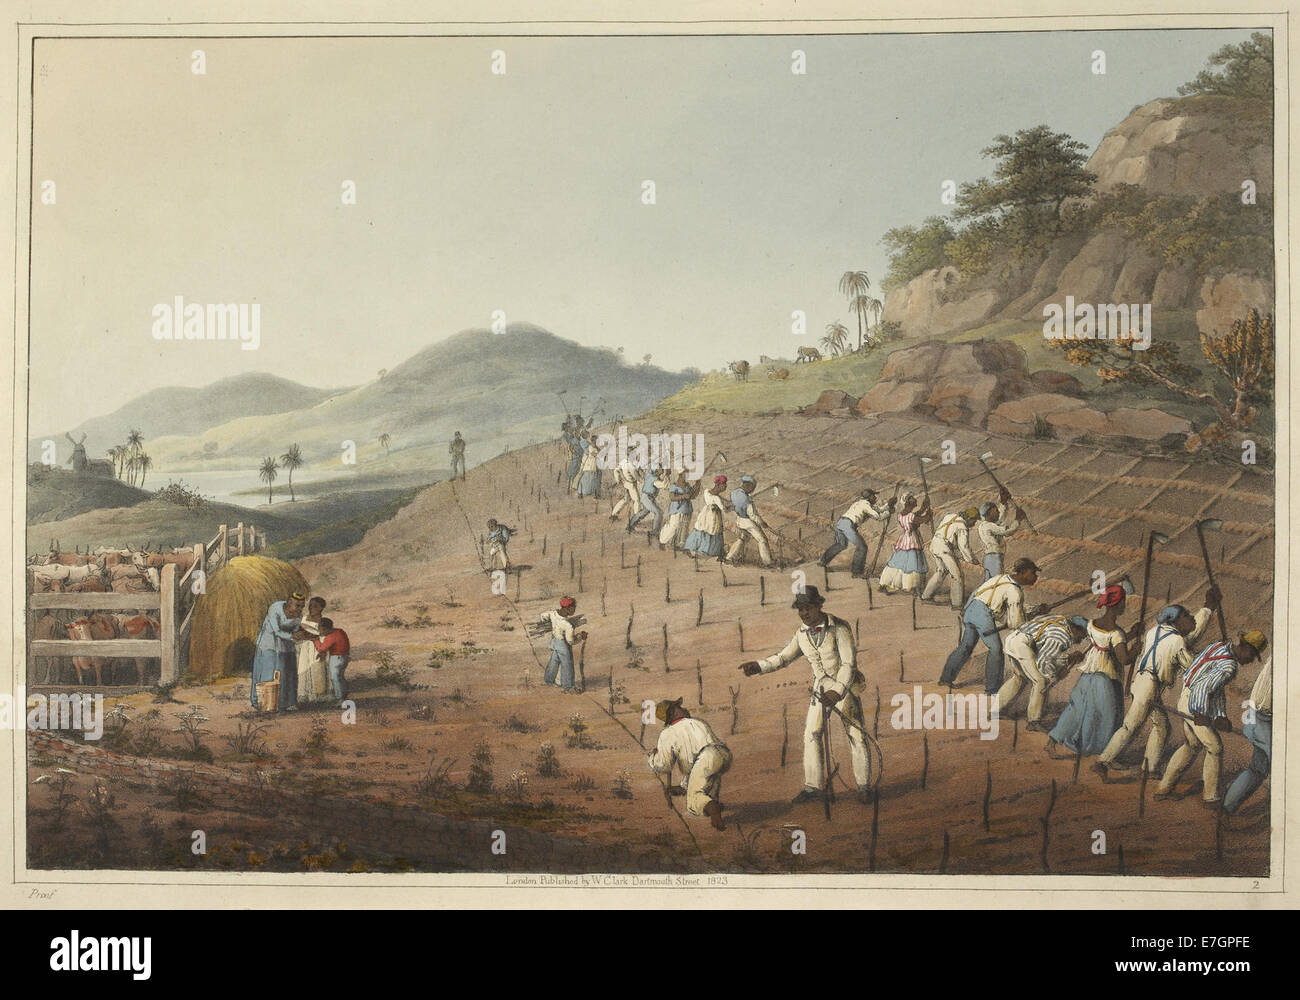 Digging the Cane-holes - Ten Views in the Island of Antigua (1823), plate II - BL Stock Photo